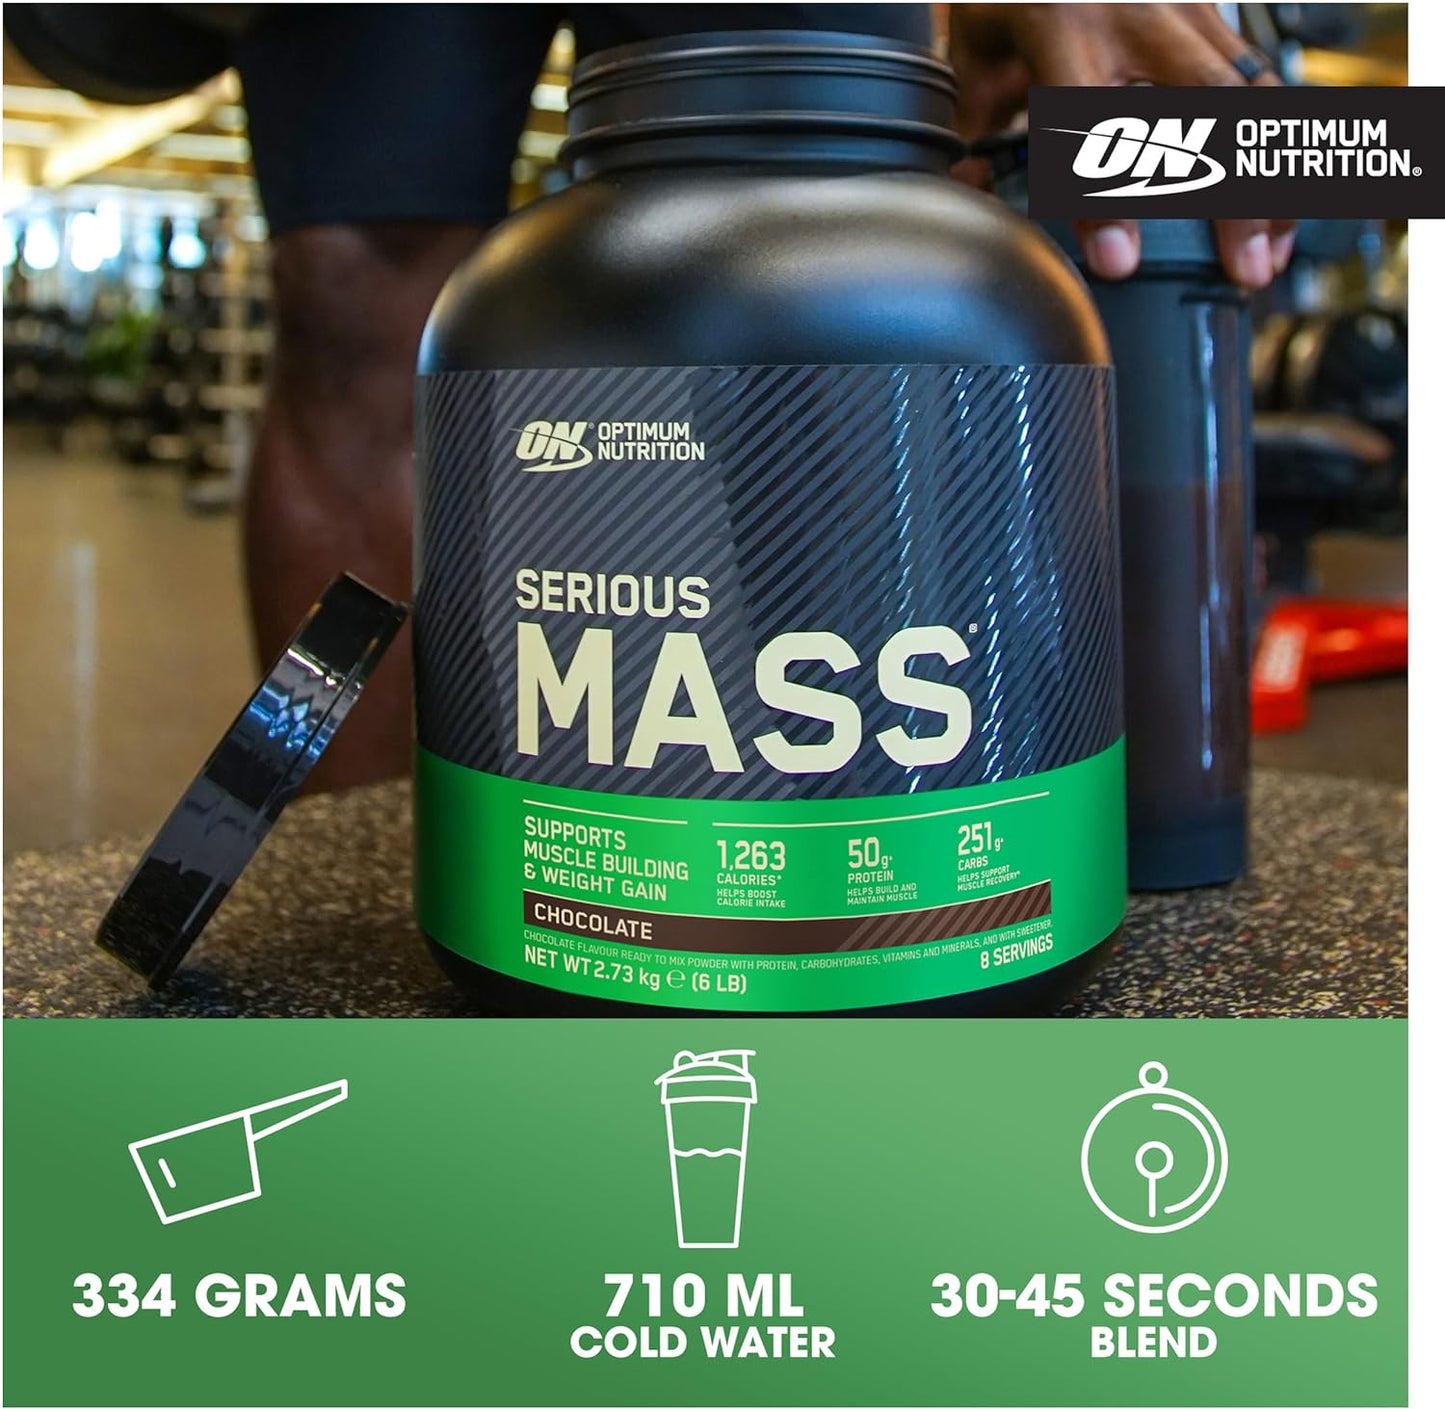 Serious Mass Protein Powder with Creatine, Glutamine, 25 Vitamins & Minerals, High Calorie Mass Gainer, Strawberry Flavour, 8 Servings, 2.73Kg, Packaging May Vary